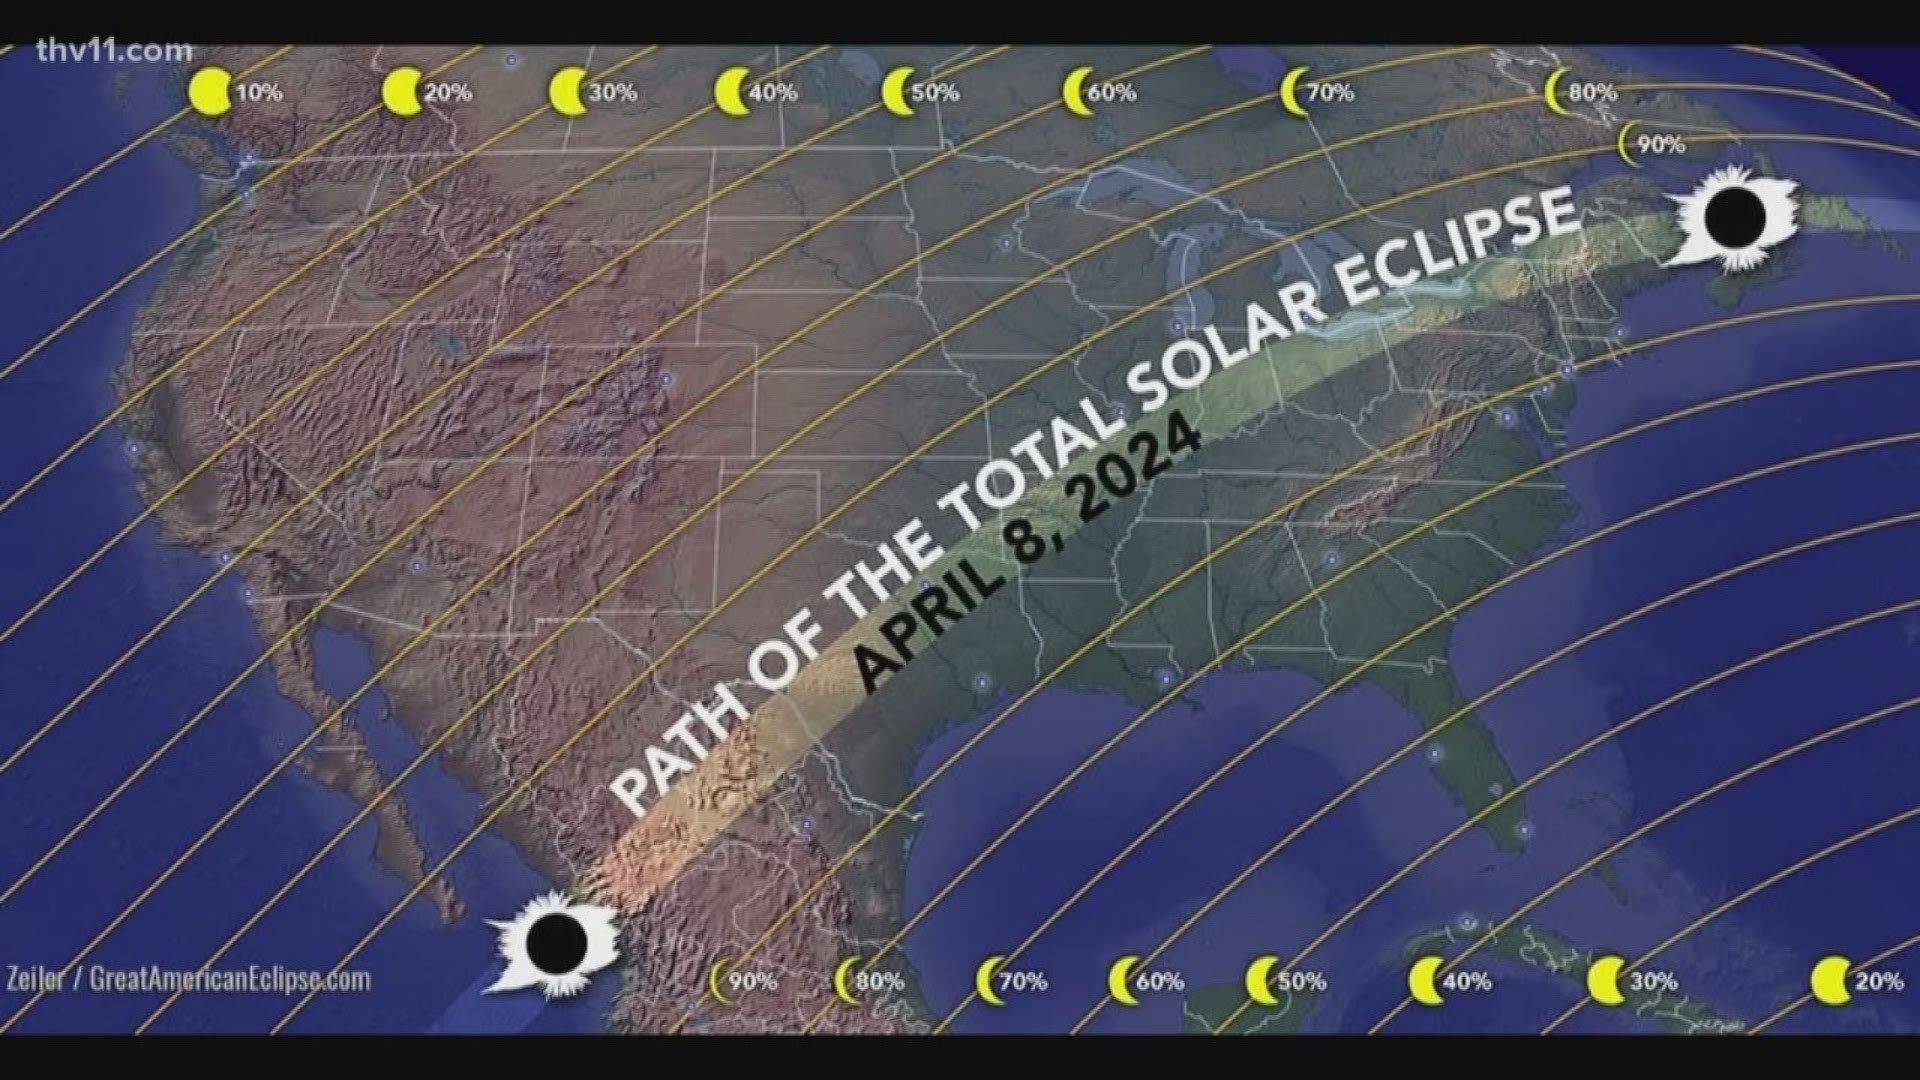 In April 2024 -- Arkansas will be covered by a solar eclipse.